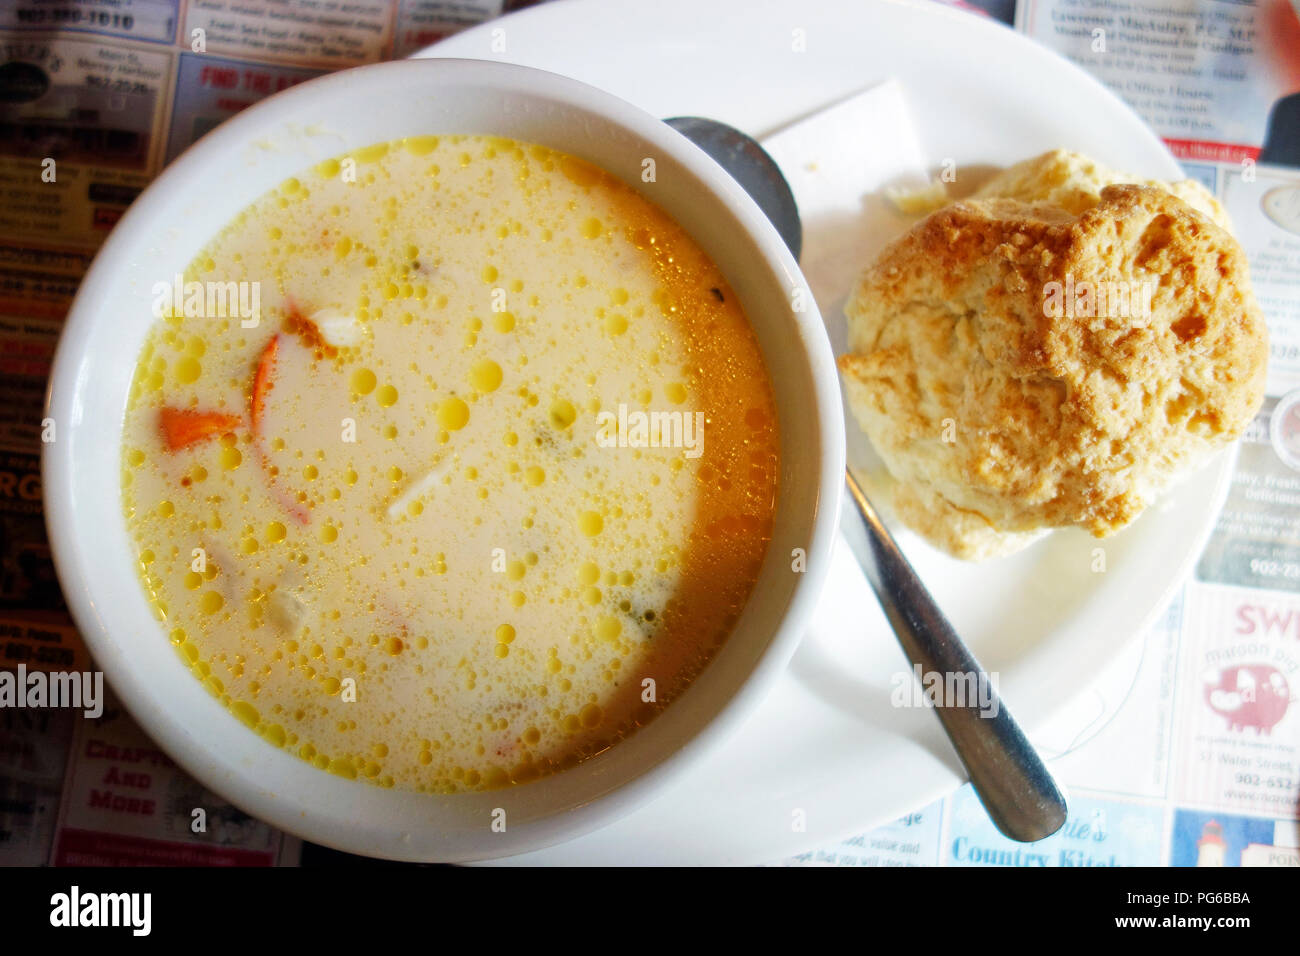 A bowl of seafood and lobster chowder and a biscuit in Prince Edward Island, Canada Stock Photo